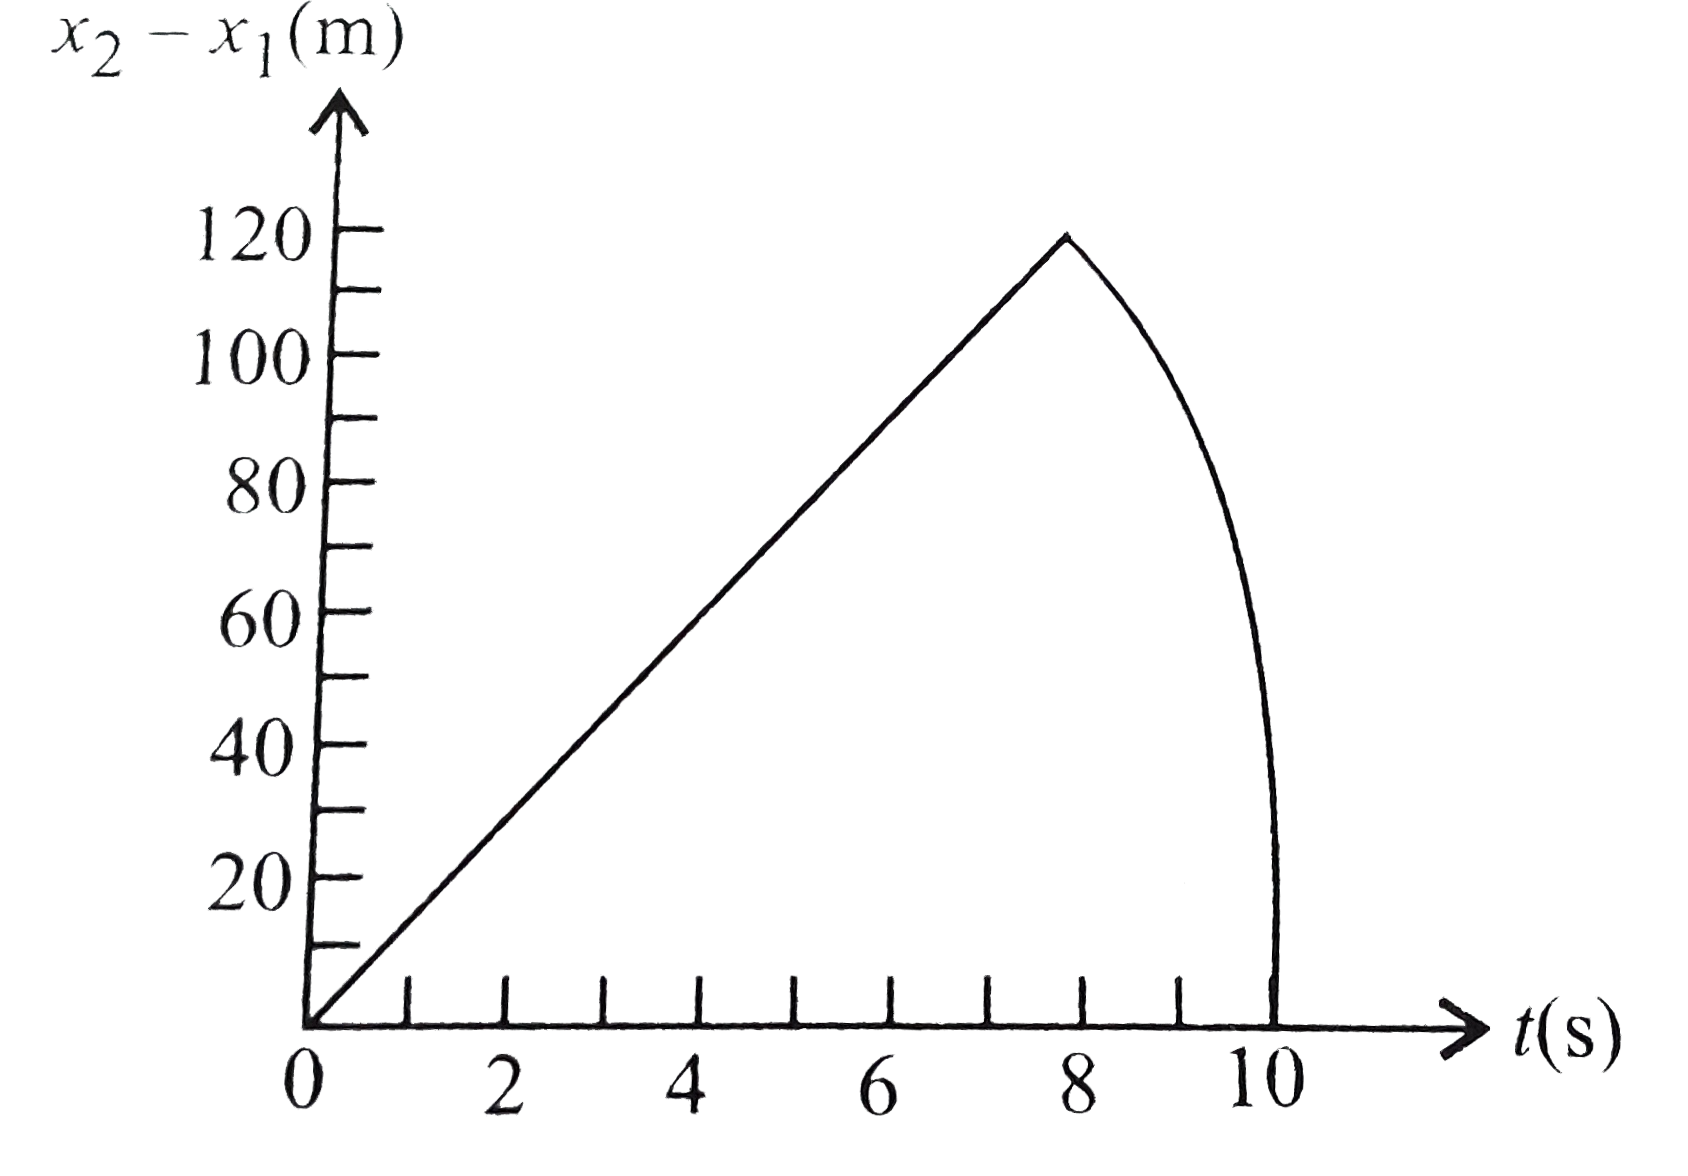 Two stones are thrown up simultaneously from the edge of a cliff 200 m high with initial speeds of 15 m s^(-1) and 30 m s^(-1) respectively. The time variation of the relative position of the second stone with respect to the first is shown in the figure. The equation of the linear part is